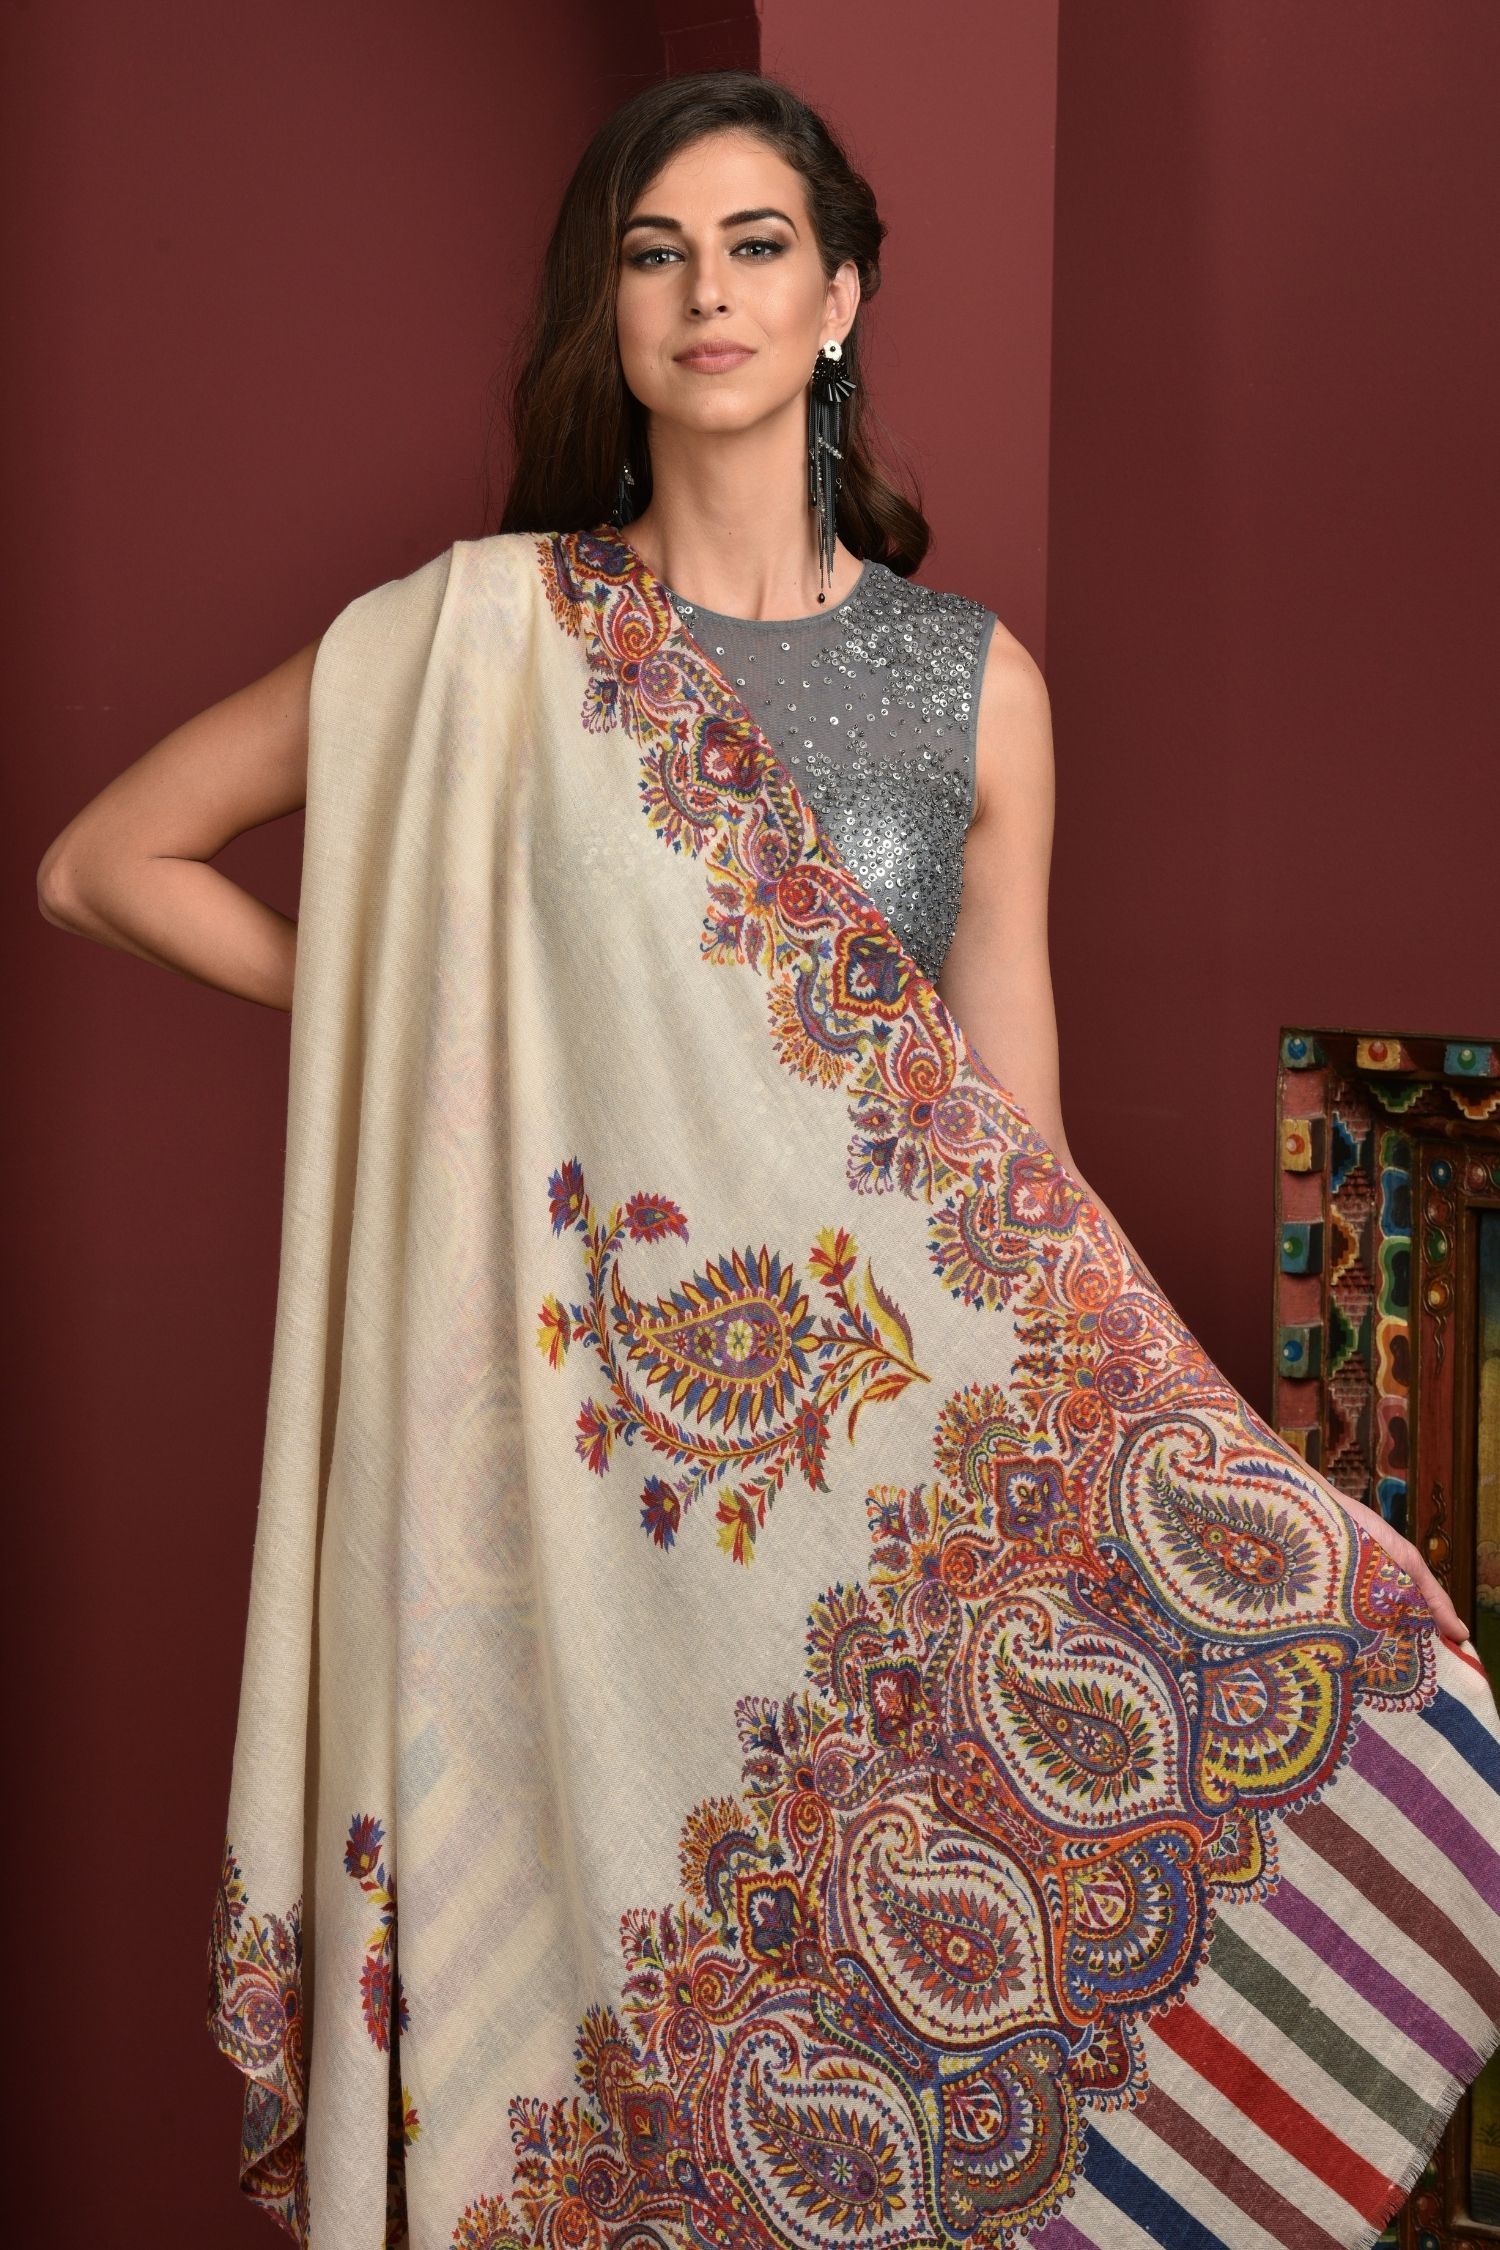 shawls and pashminas - OFF-59% > Shipping free